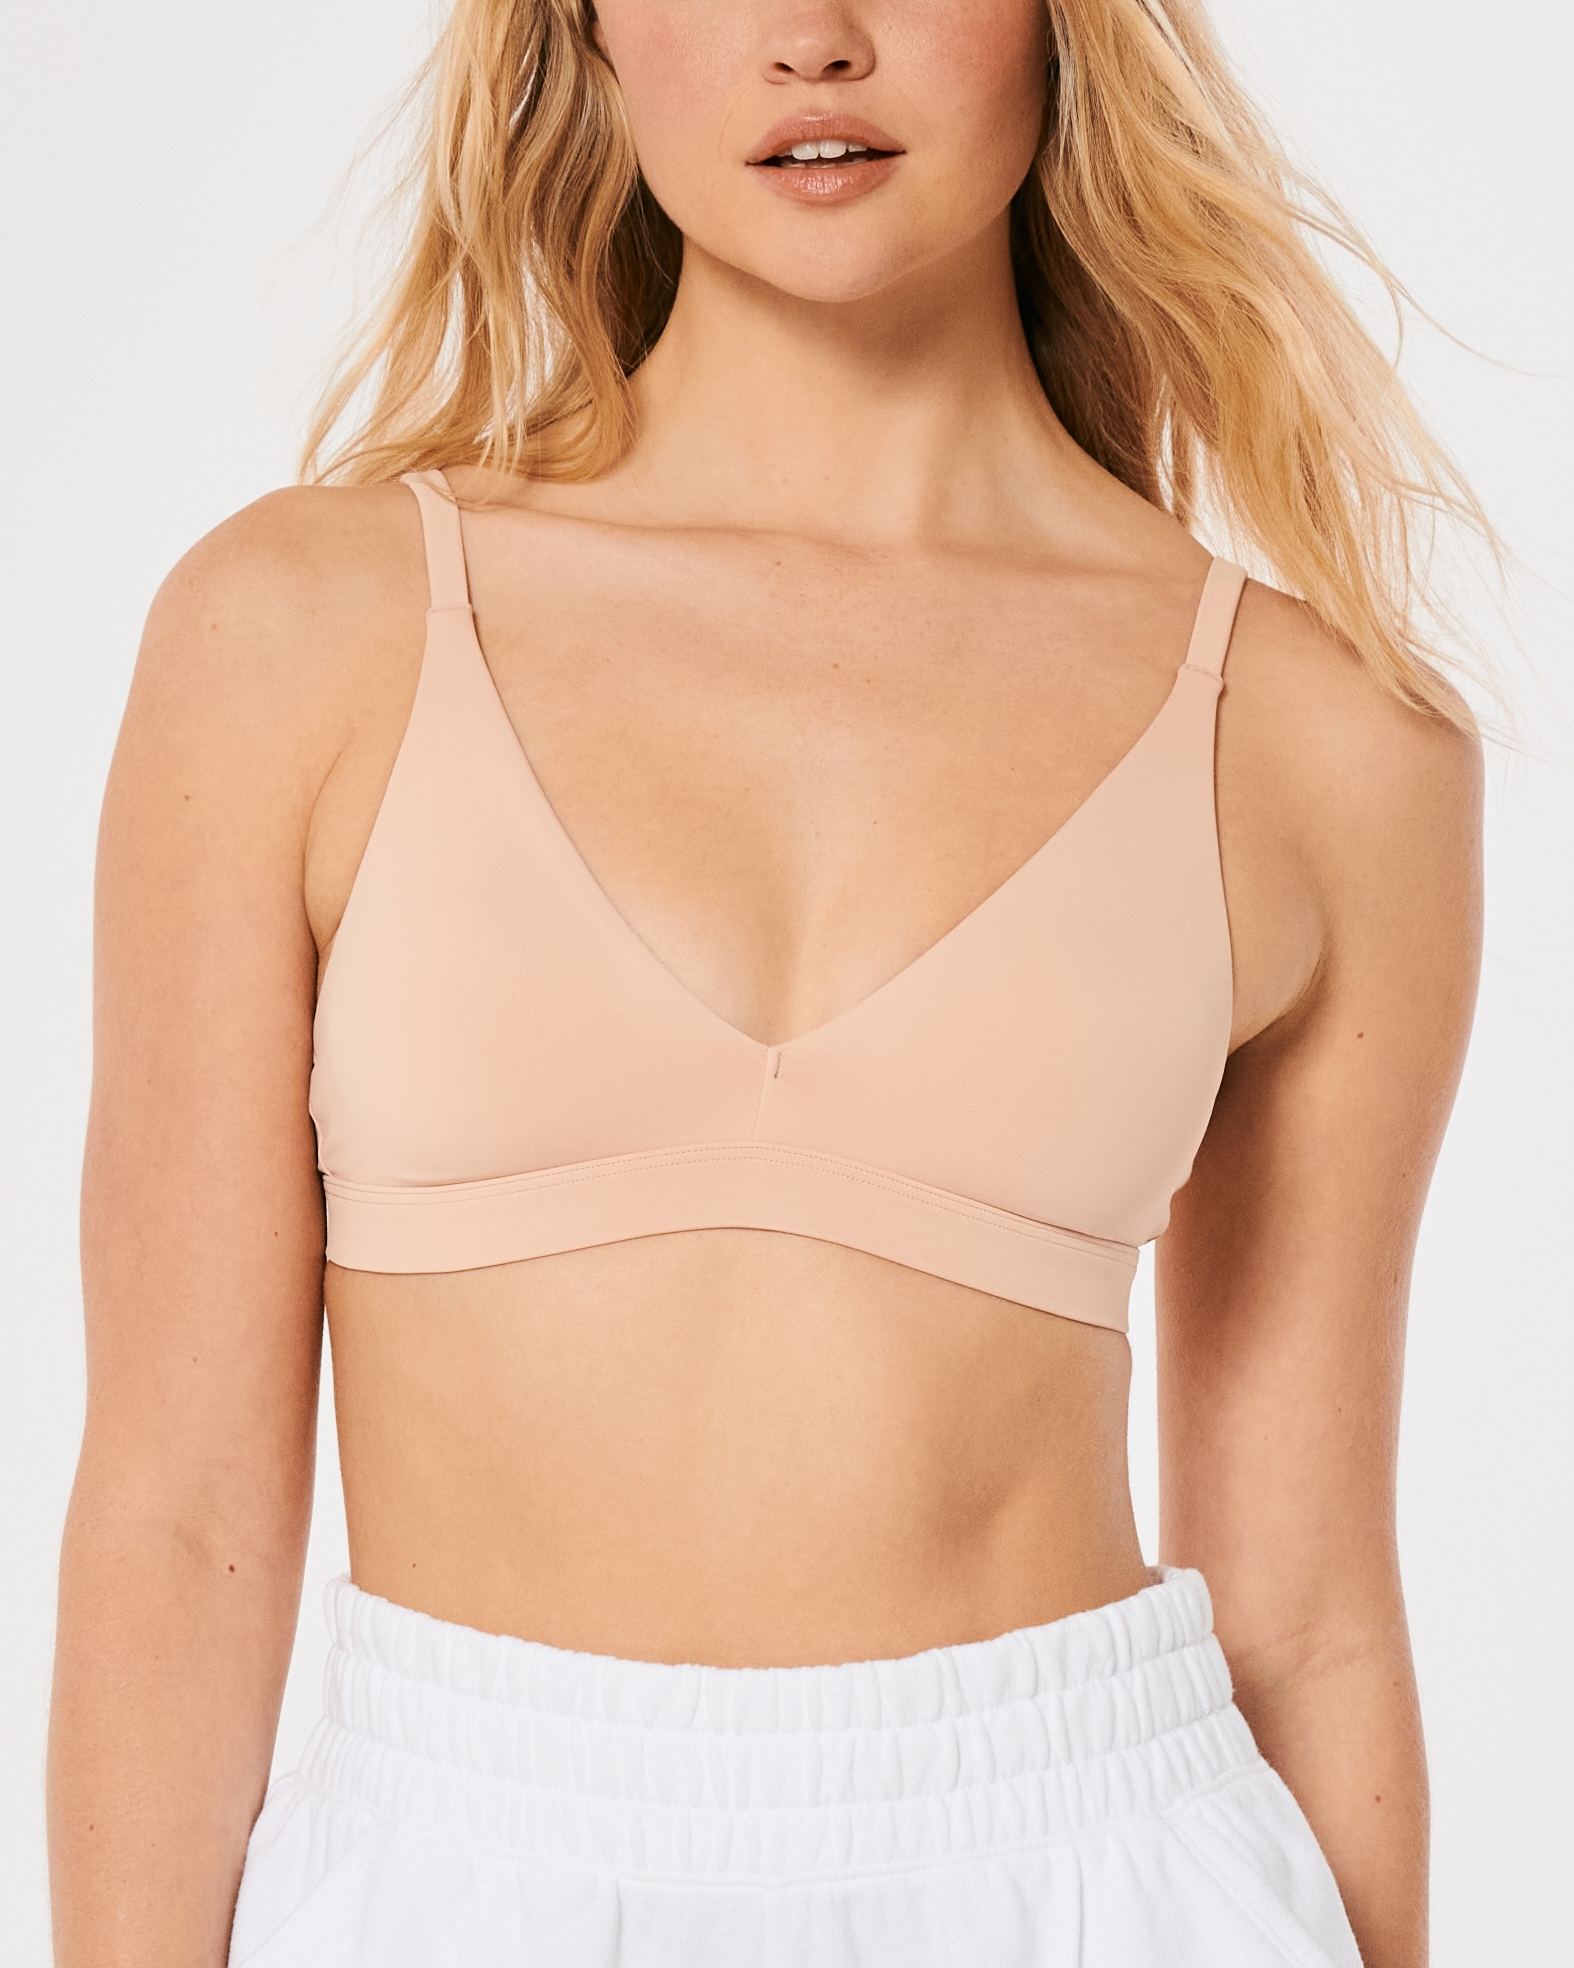 Women's Gilly Hicks Micro Triangle Bralette